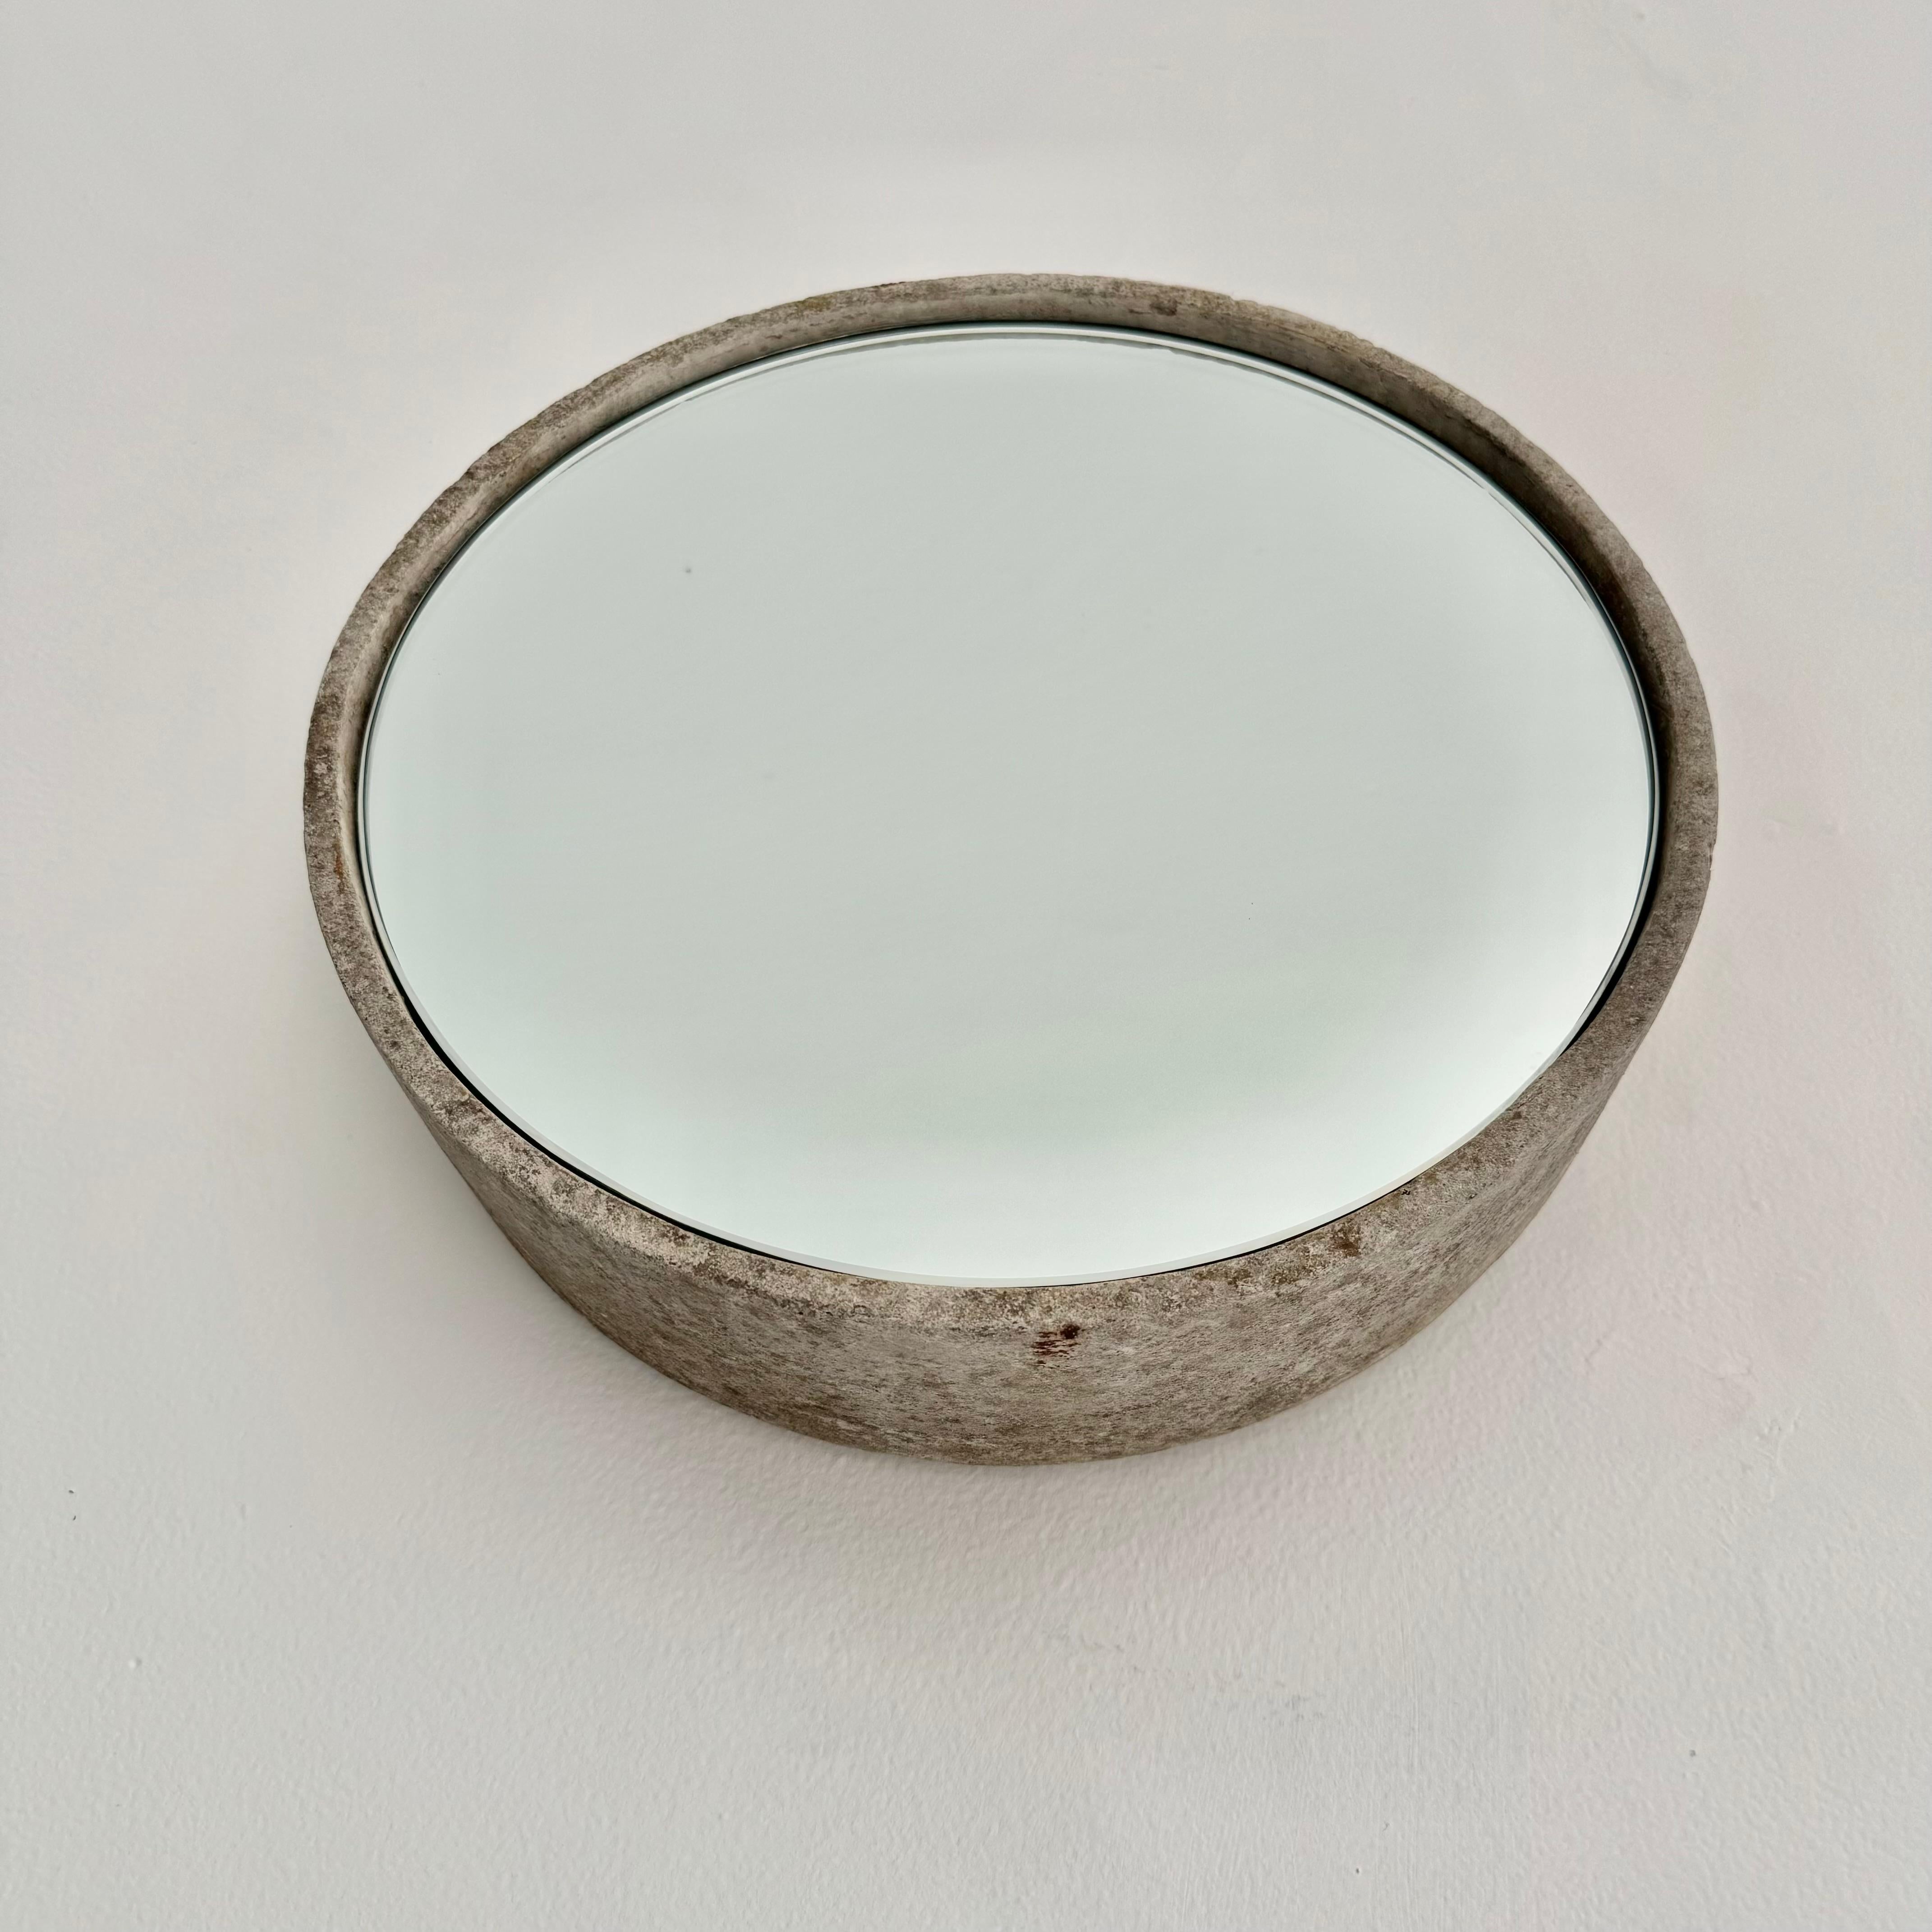 Very cool and unique circular Willy Guhl concrete mirror. Concrete vessel originally produced at the Eternit factory in Switzerland in the 1960’s. Custom mirror/ glass was professionally hand cut and added recently. Beautiful patina as expected with